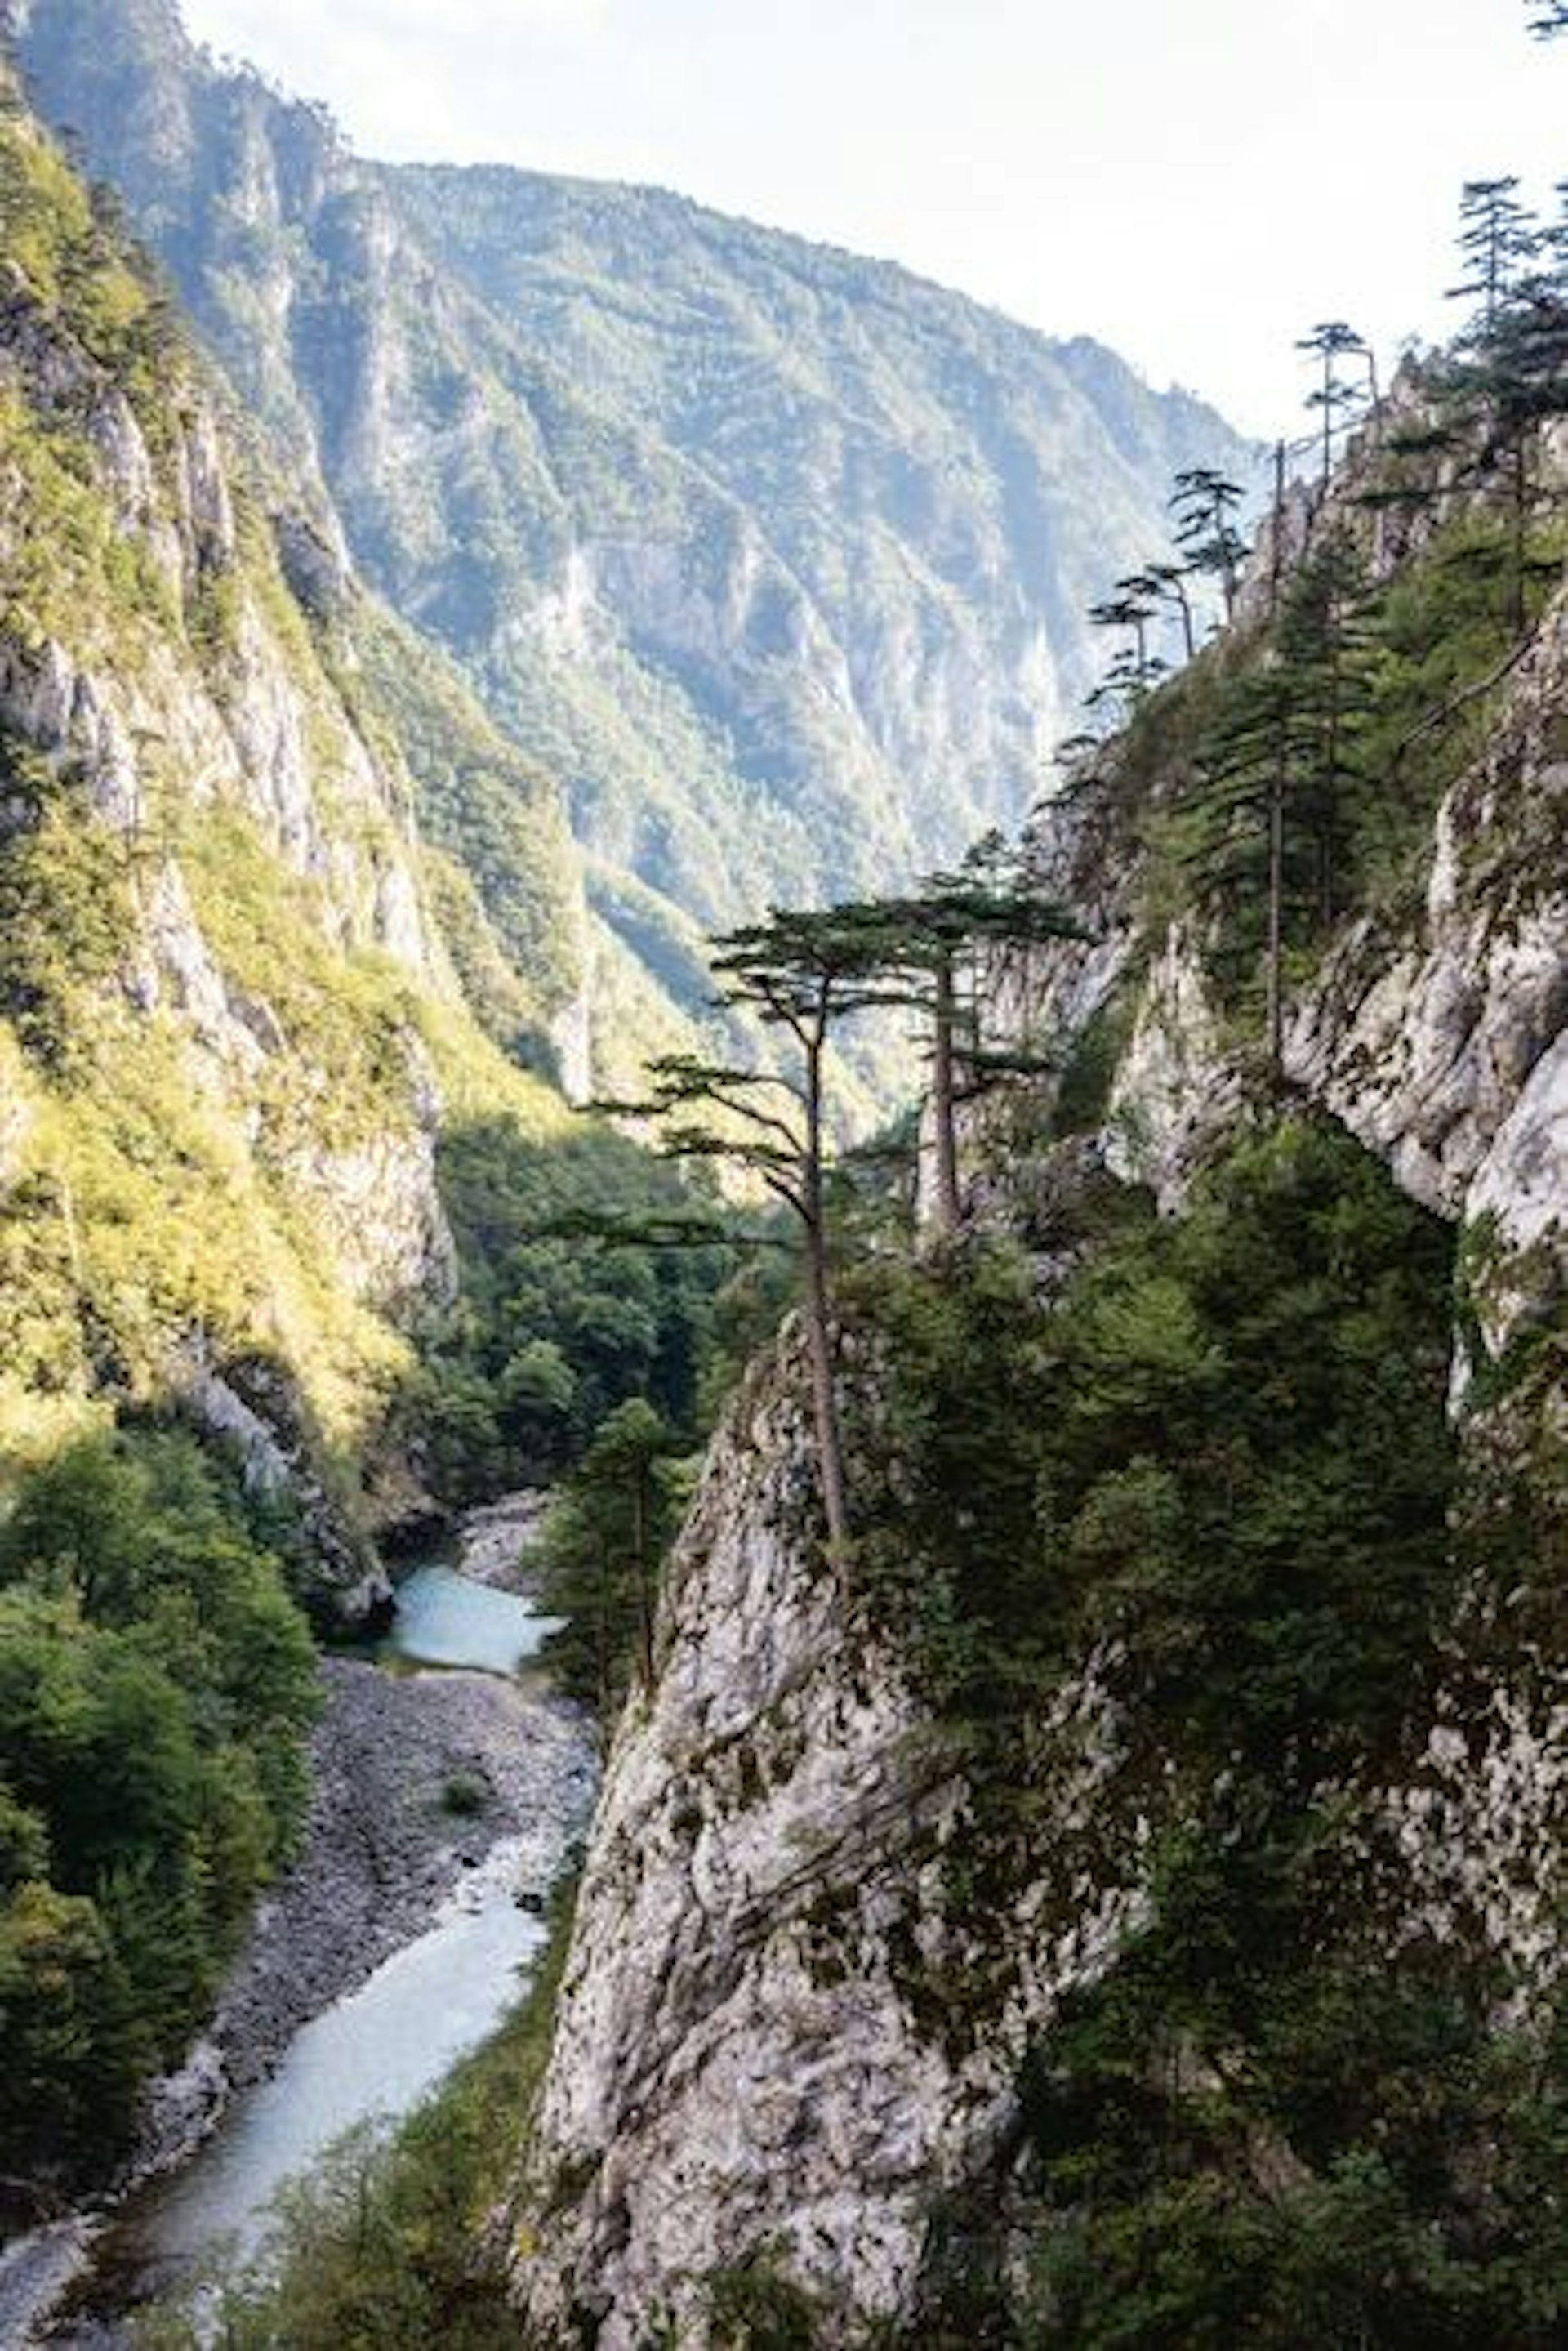 What remains of the Piva River below the Mratinje Dam in Montenegro.